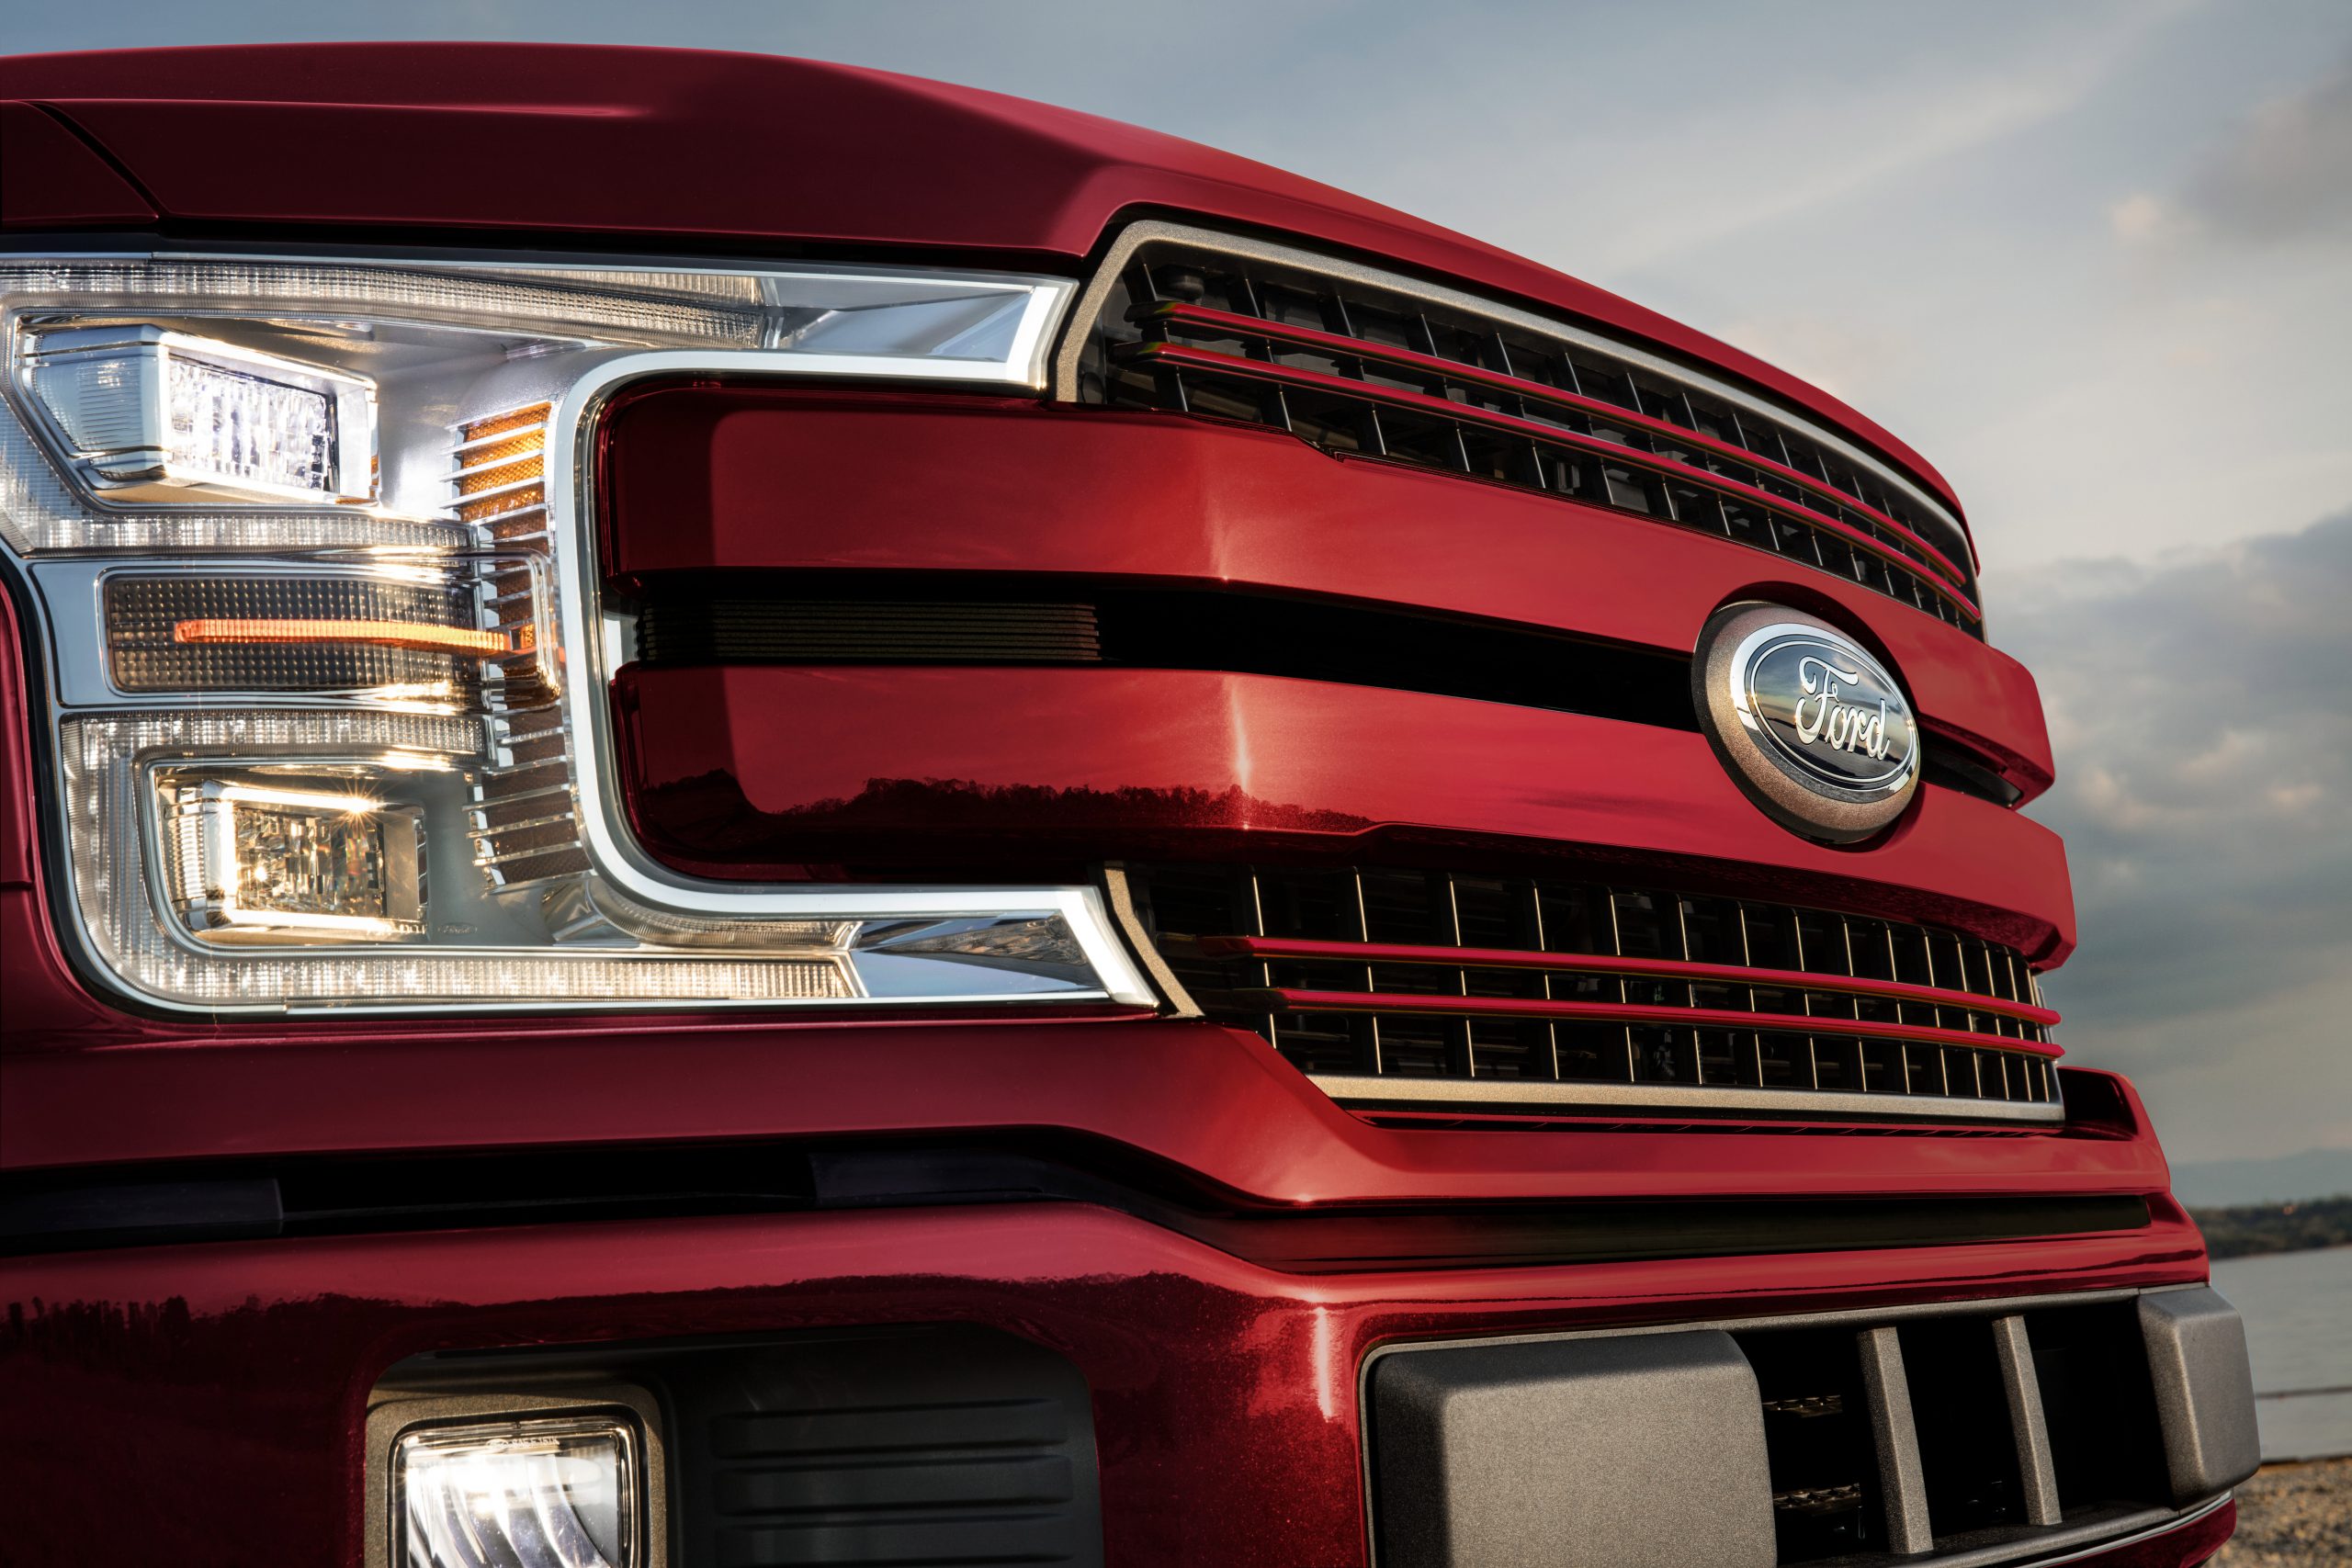 Pickup Trucks Outsell Cars for the First Time | THE SHOP